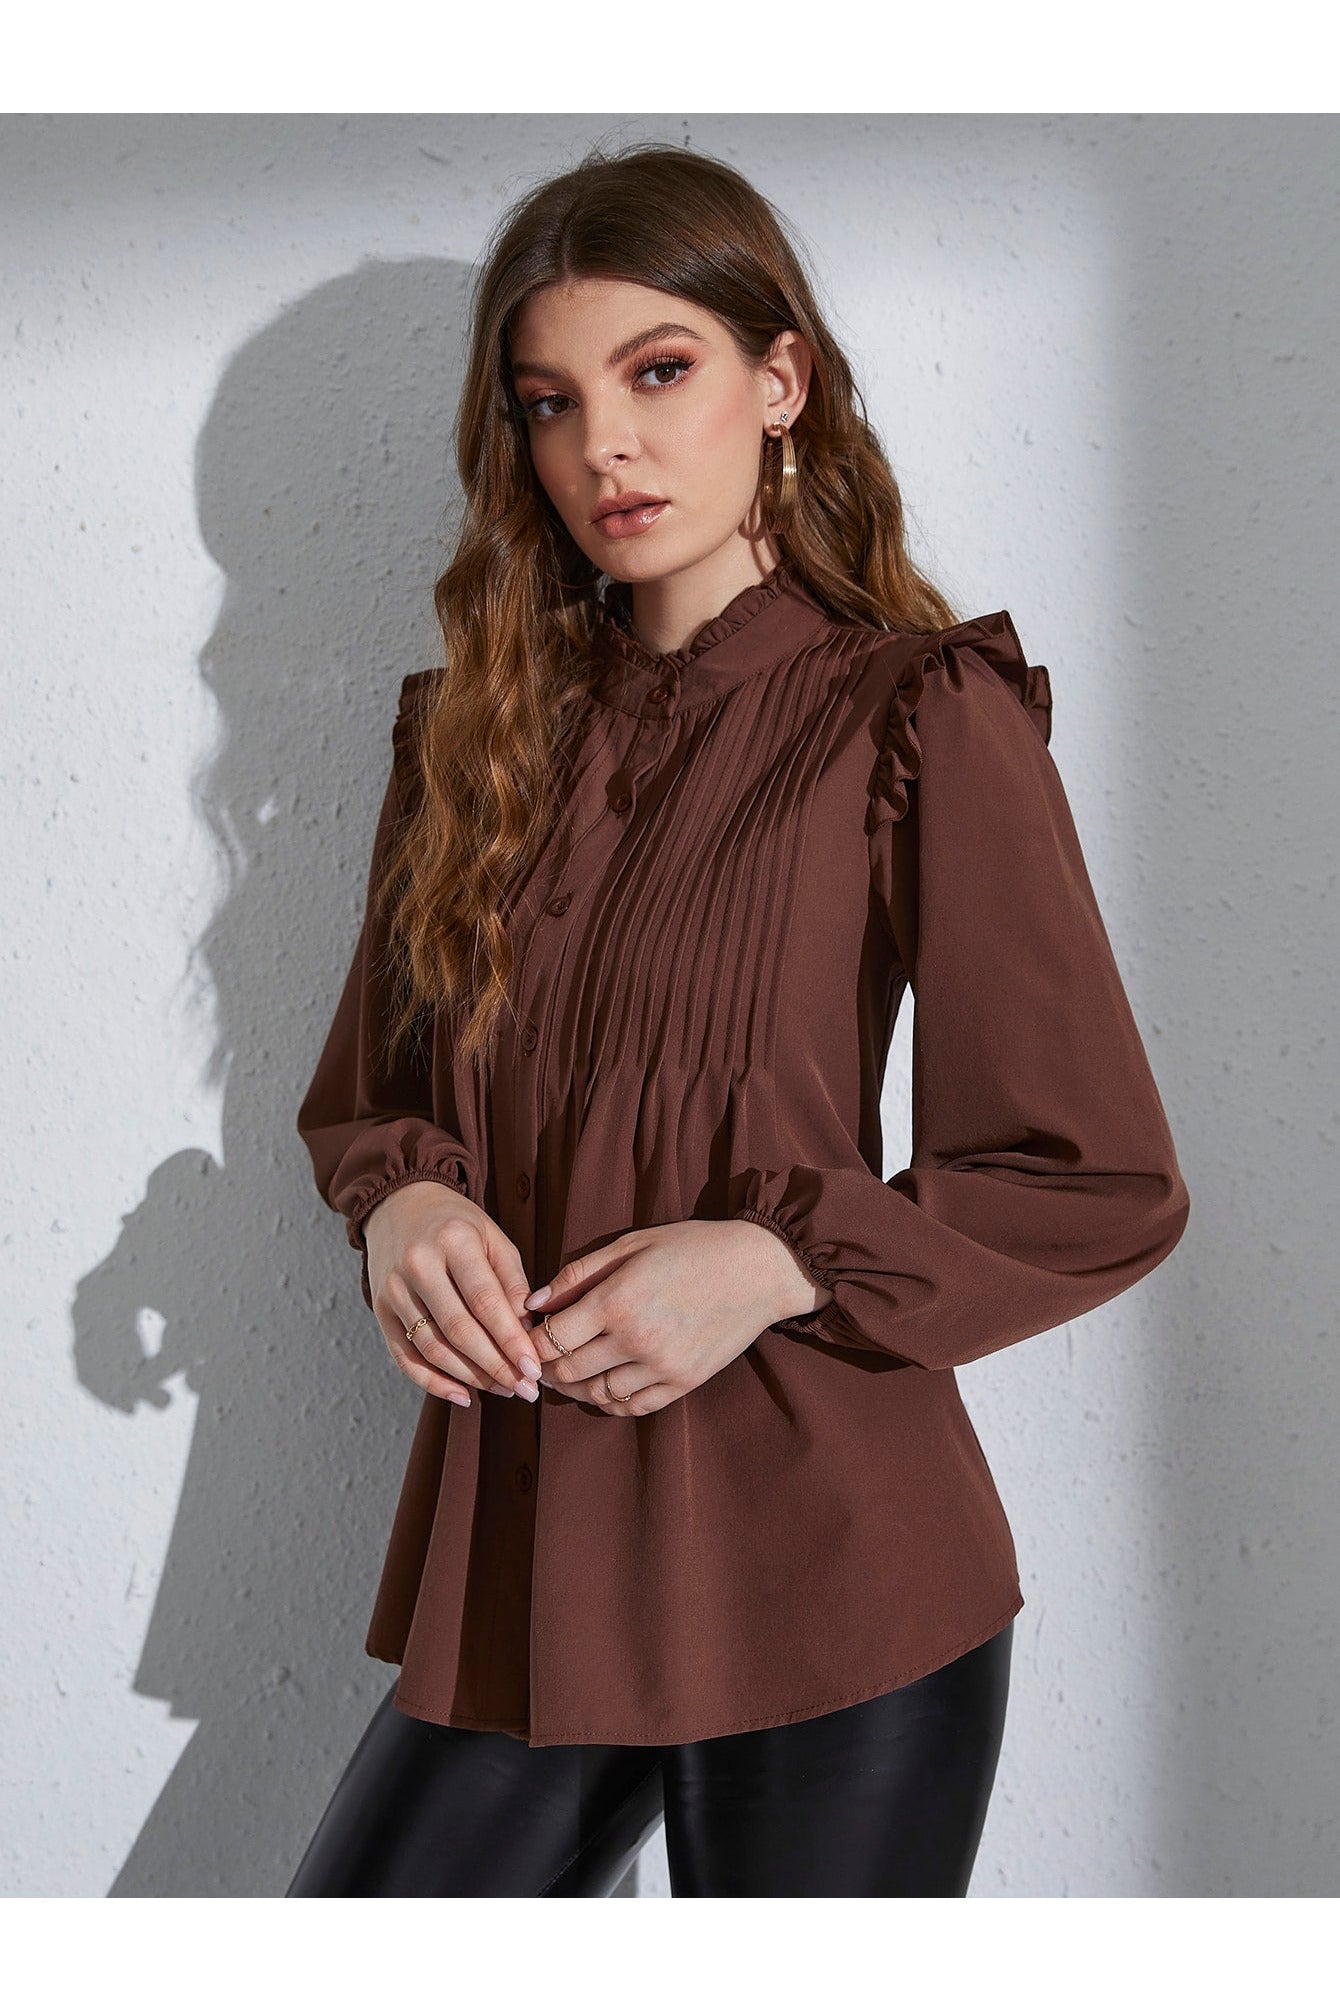 Buy Shein Frill Neck Pleated Button Up Blouse - Small in Pakistan